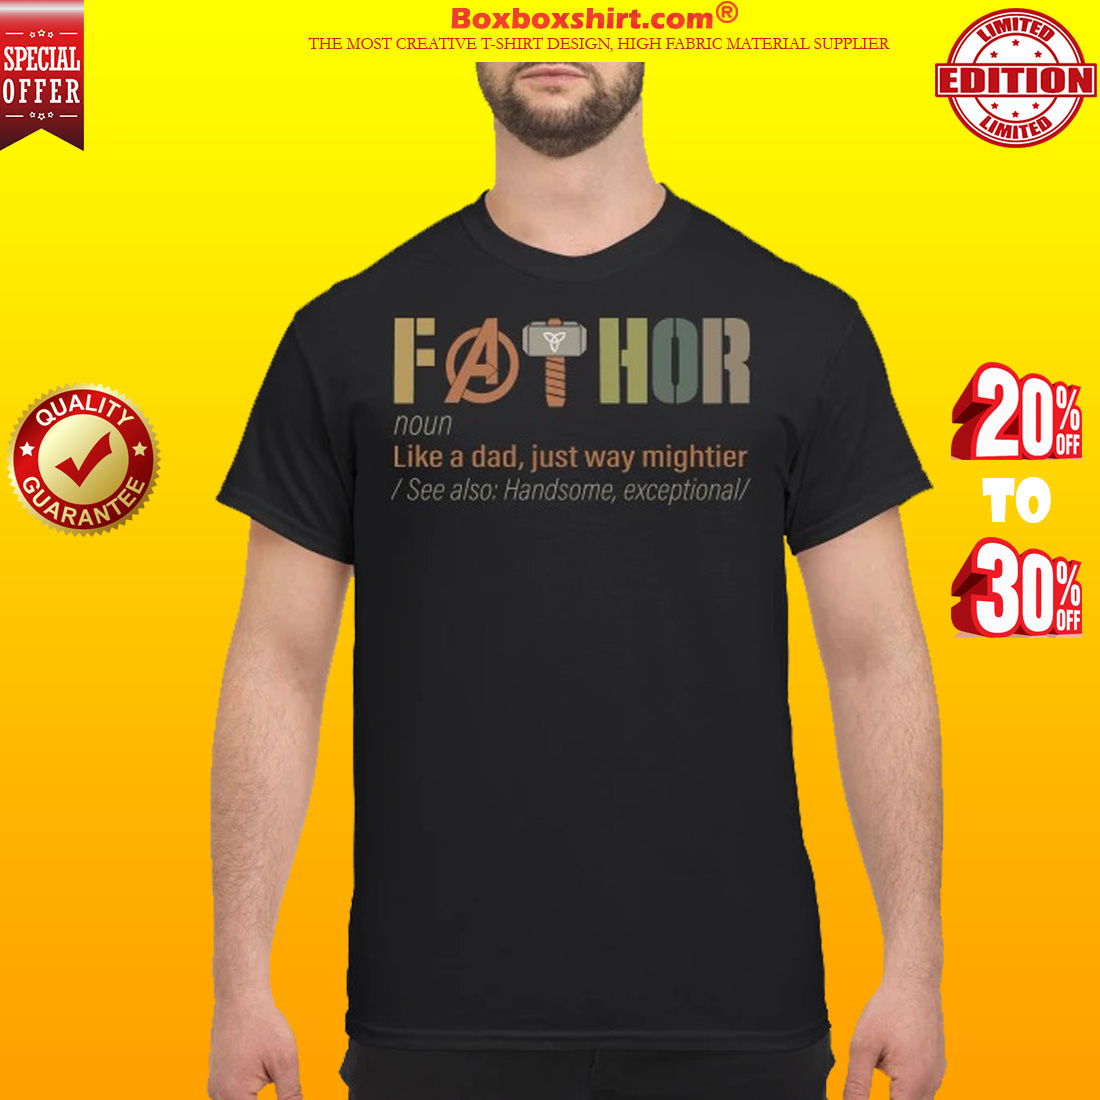 Avenger fathor like a dad just way mightier classic shirt